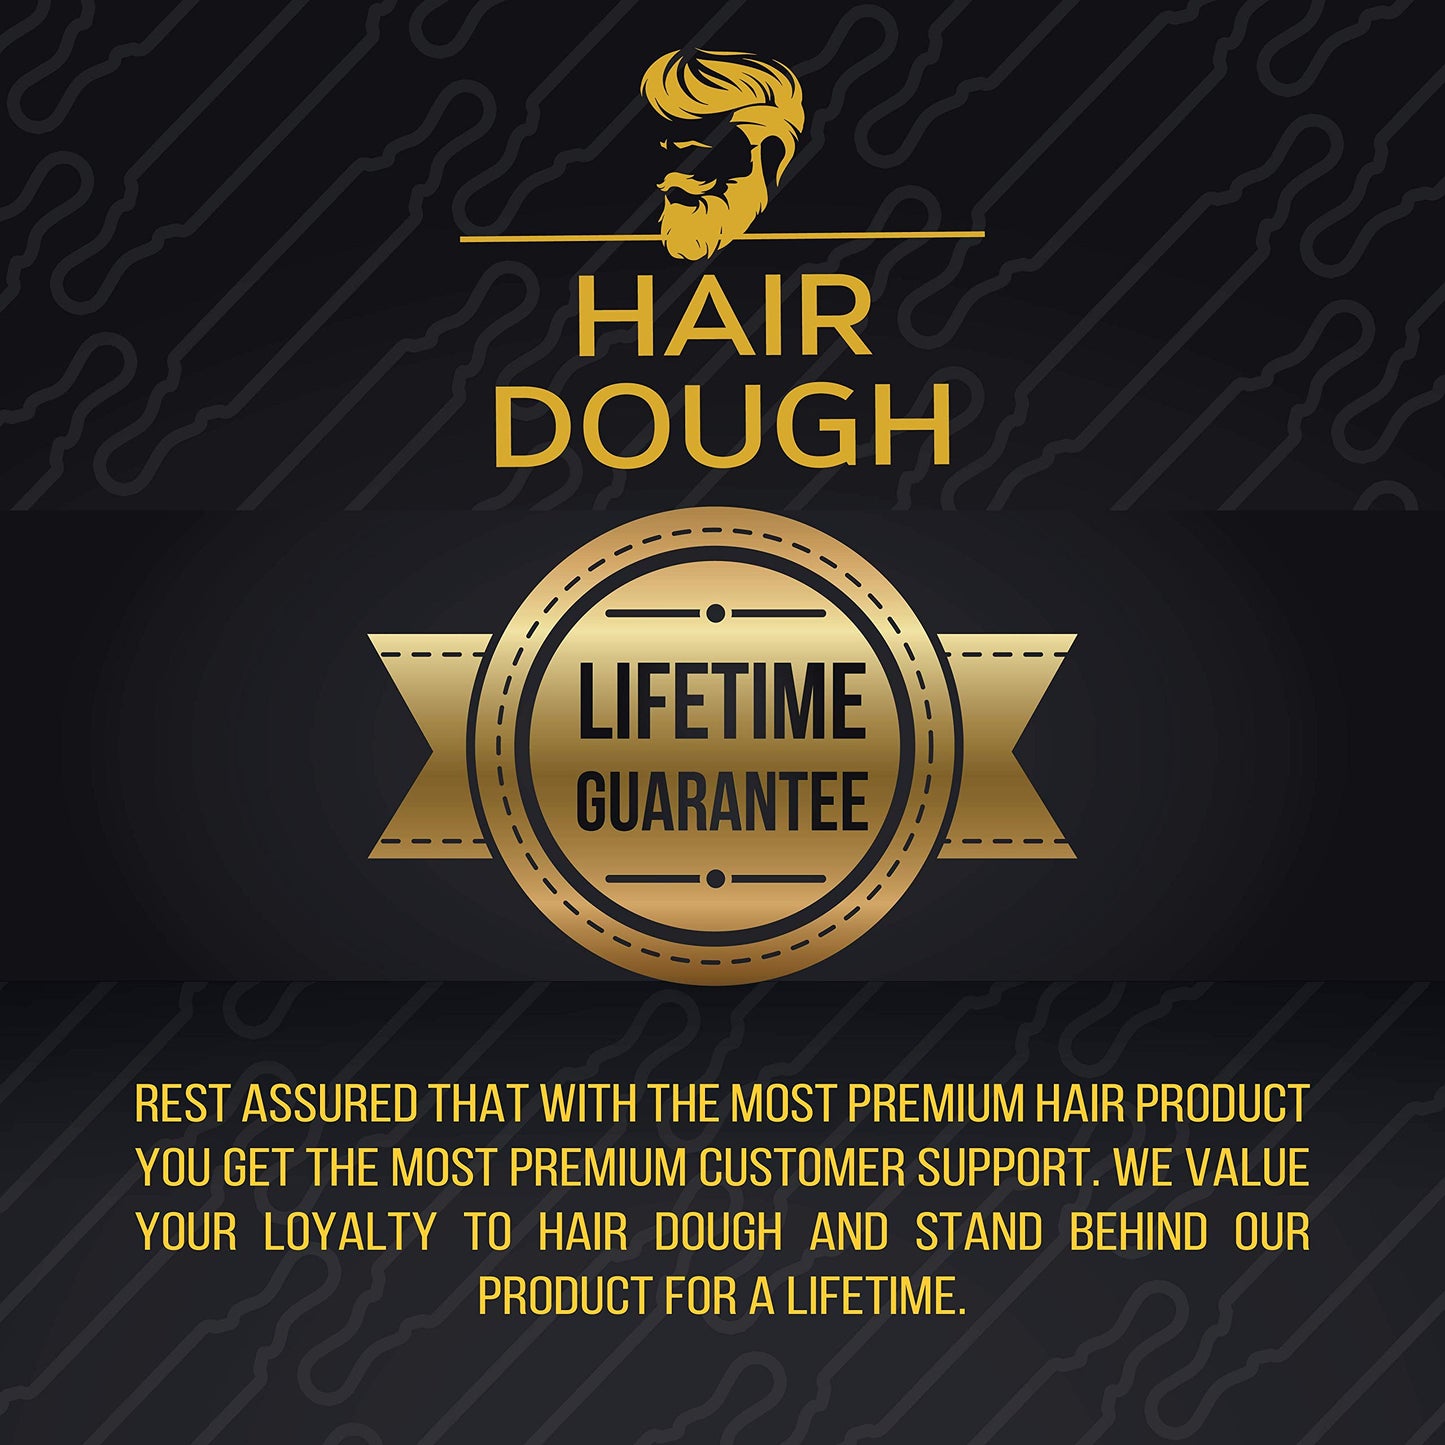 Hair Dough Quiff Roller Round Brush, Small is perfect to Style and Add Volume to any Short Hair, Roller Brush works great with Wax, Clay, Beard Balm, Pomade.